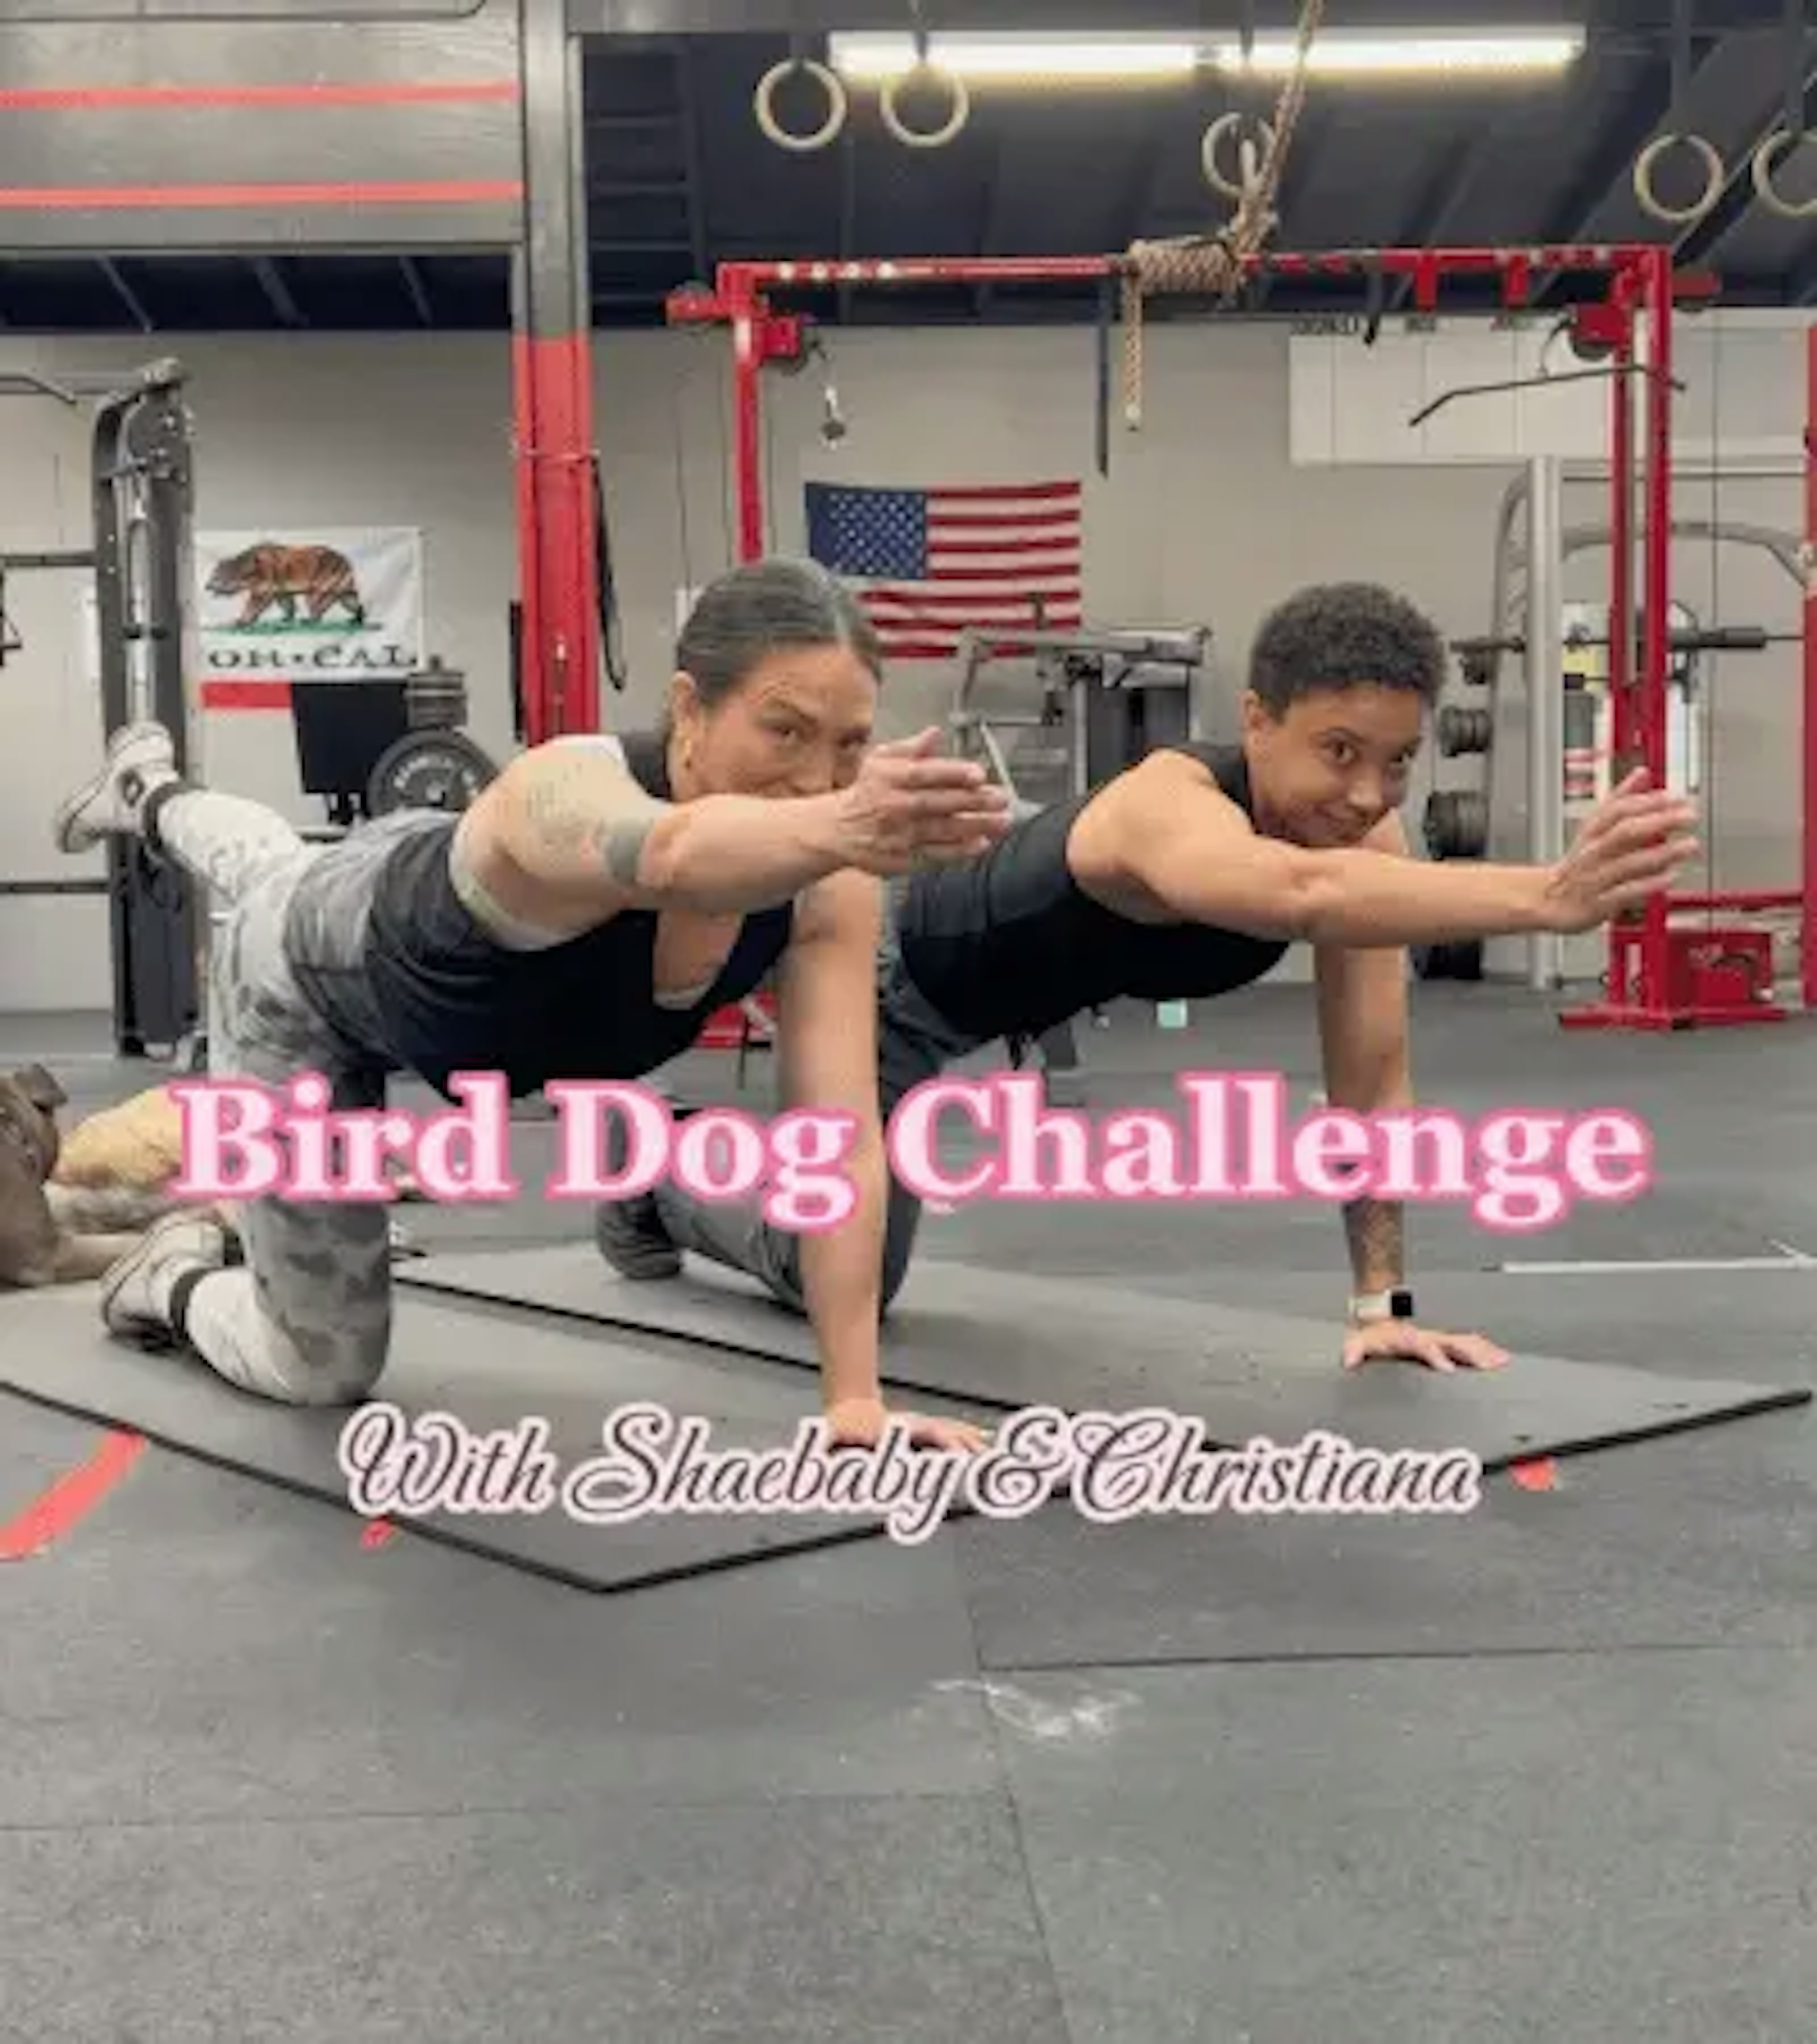 Two personal trainers performing the bird dog exercise challenge.